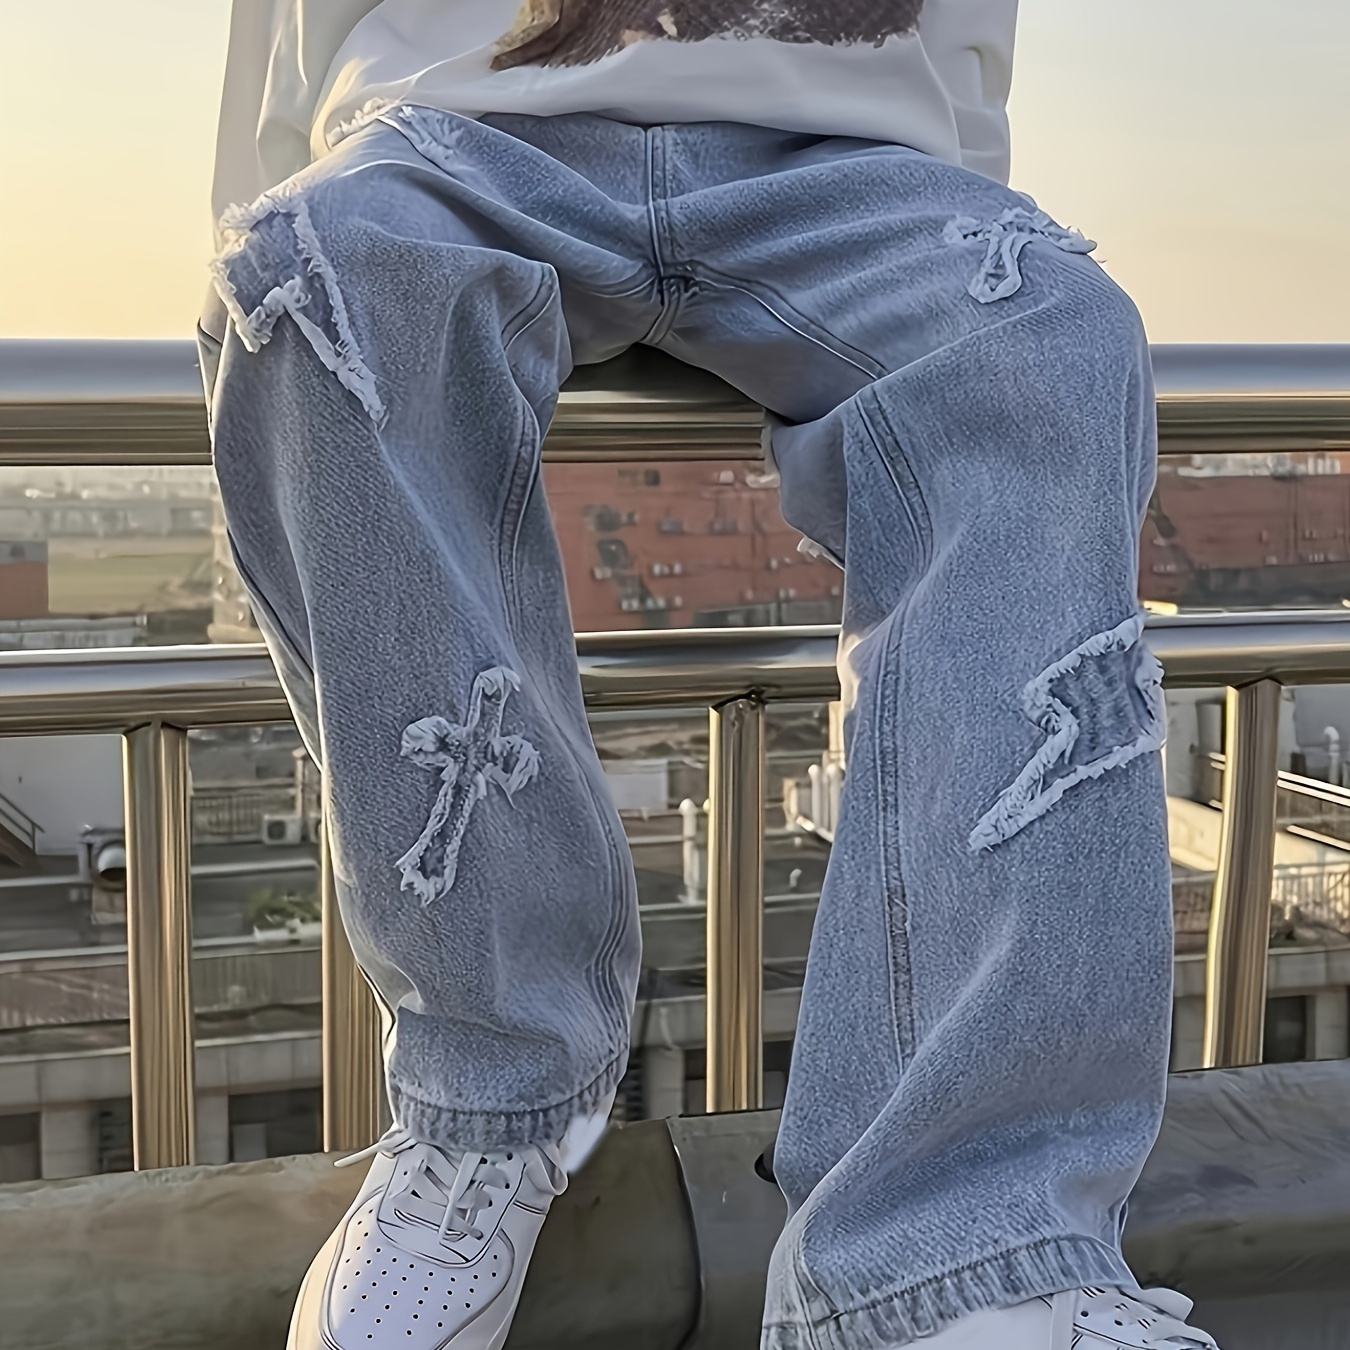 

Embroidery Loose Ripped Cotton Blend Jeans, Men's Casual Street Style Distressed Denim Pants For Spring Summer